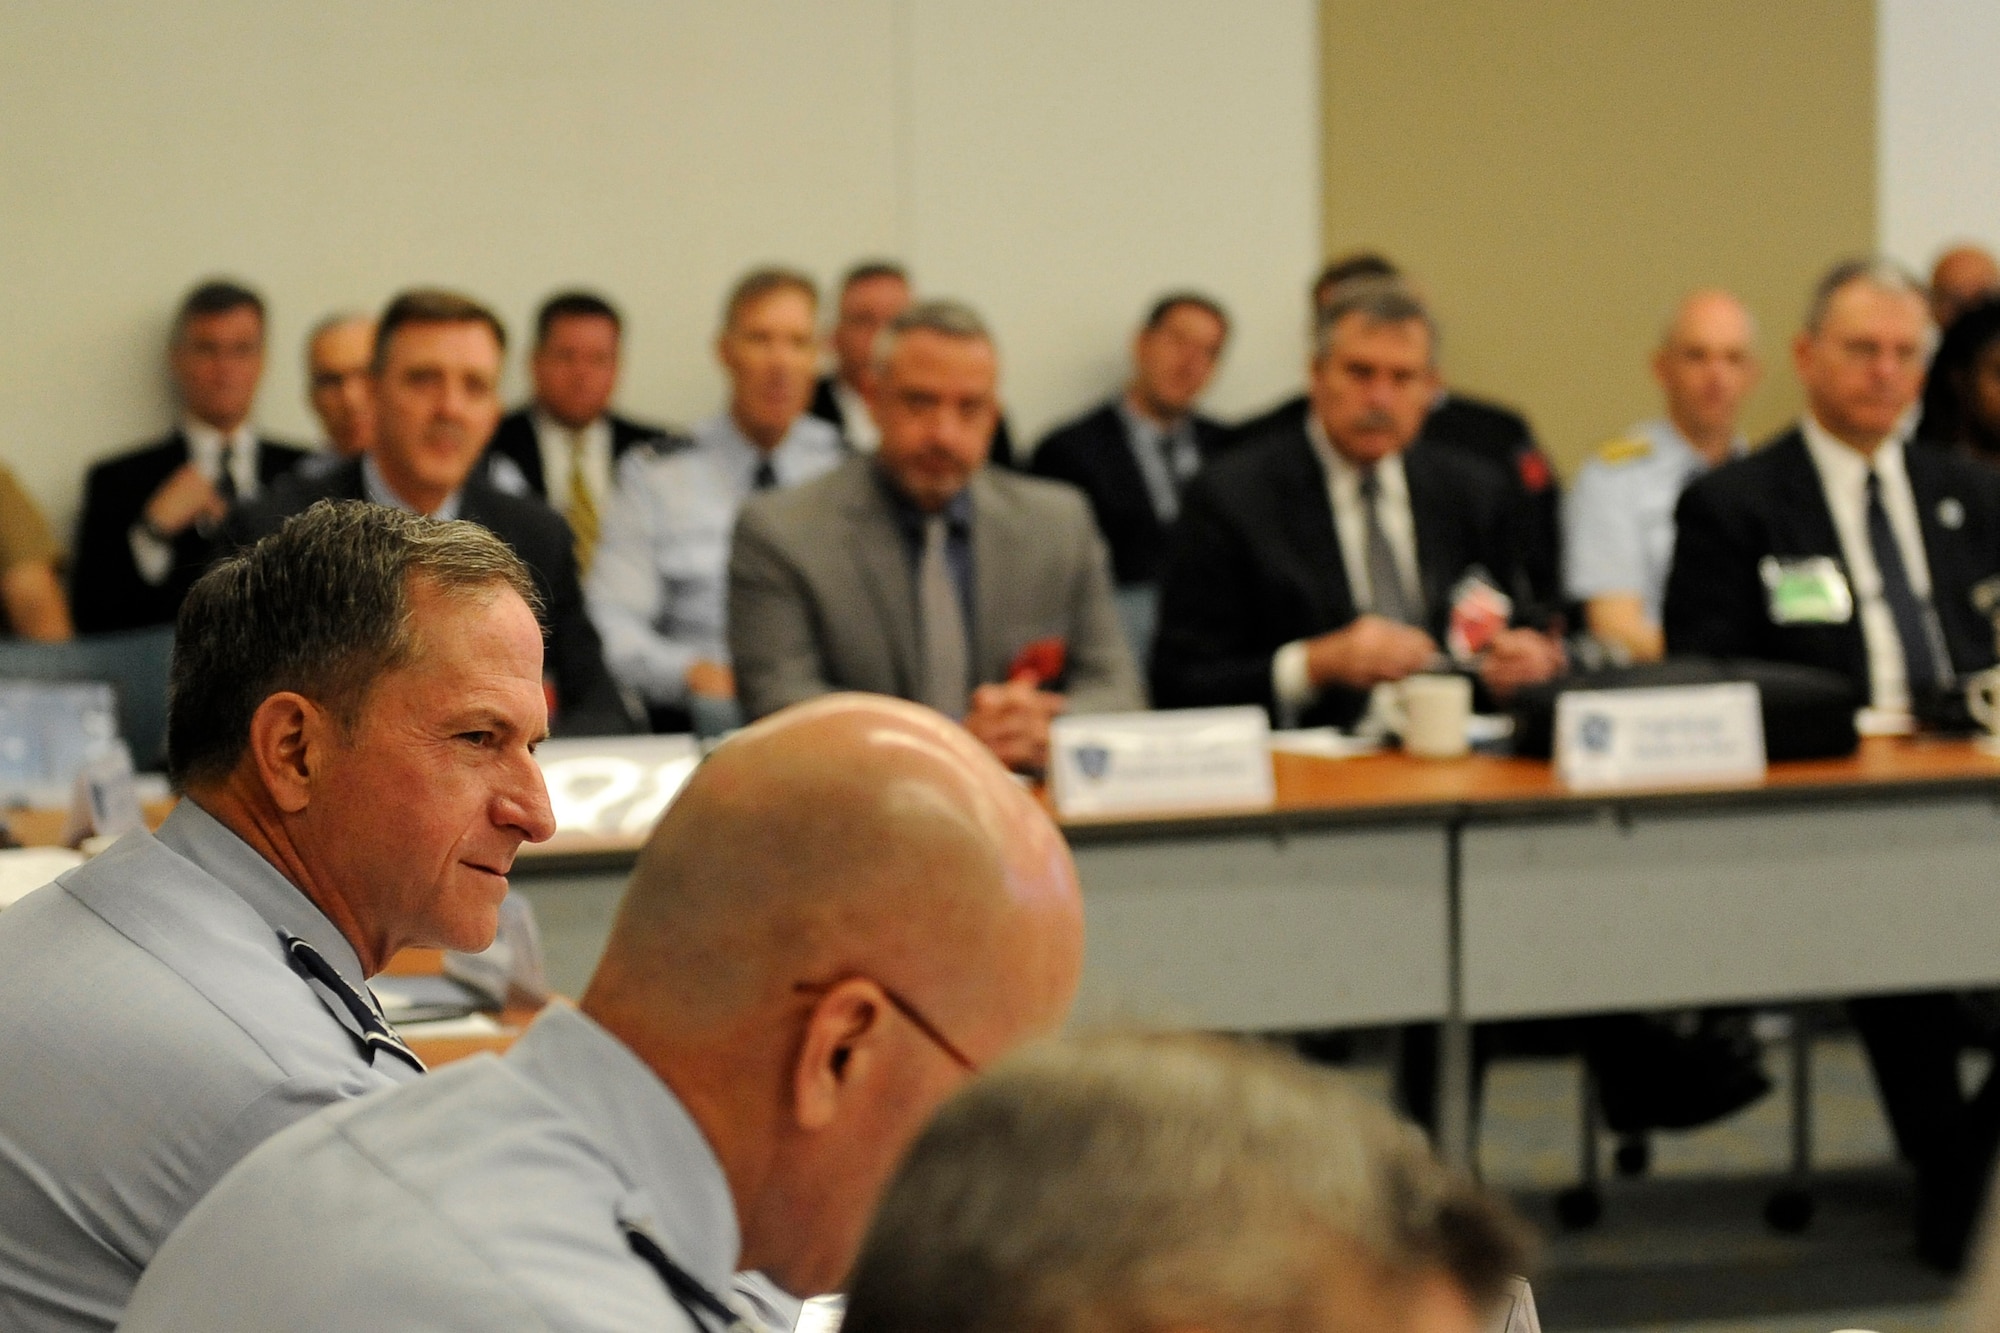 Air Force Chief of Staff Gen. David L. Goldfein discusses the national pilot sourcing with airline executives at the National Pilot Sourcing Meeting in Alexandria, Virginia, May 18, 2017. The meeting was held to discuss opportunities to improve collaboration between airlines and the military to ensure high-quality pilots for the need of the nation. (U.S. Air Force photo/Staff Sgt. Jannelle McRae)